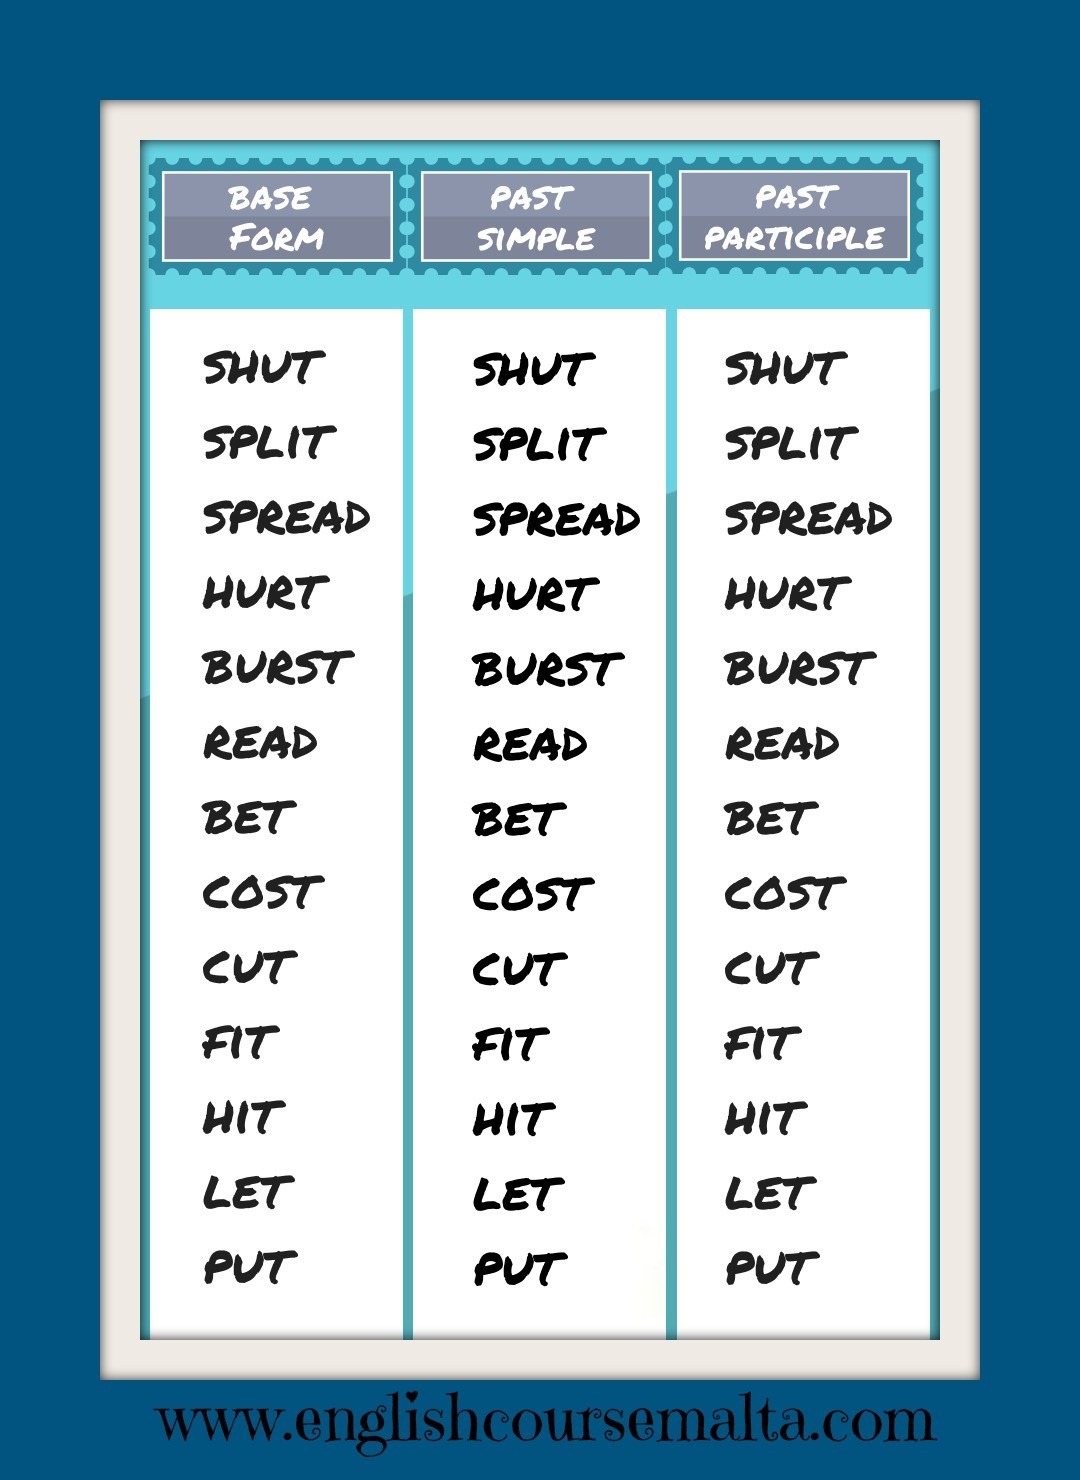 verbs-that-stay-the-same-in-the-past-english-course-malta